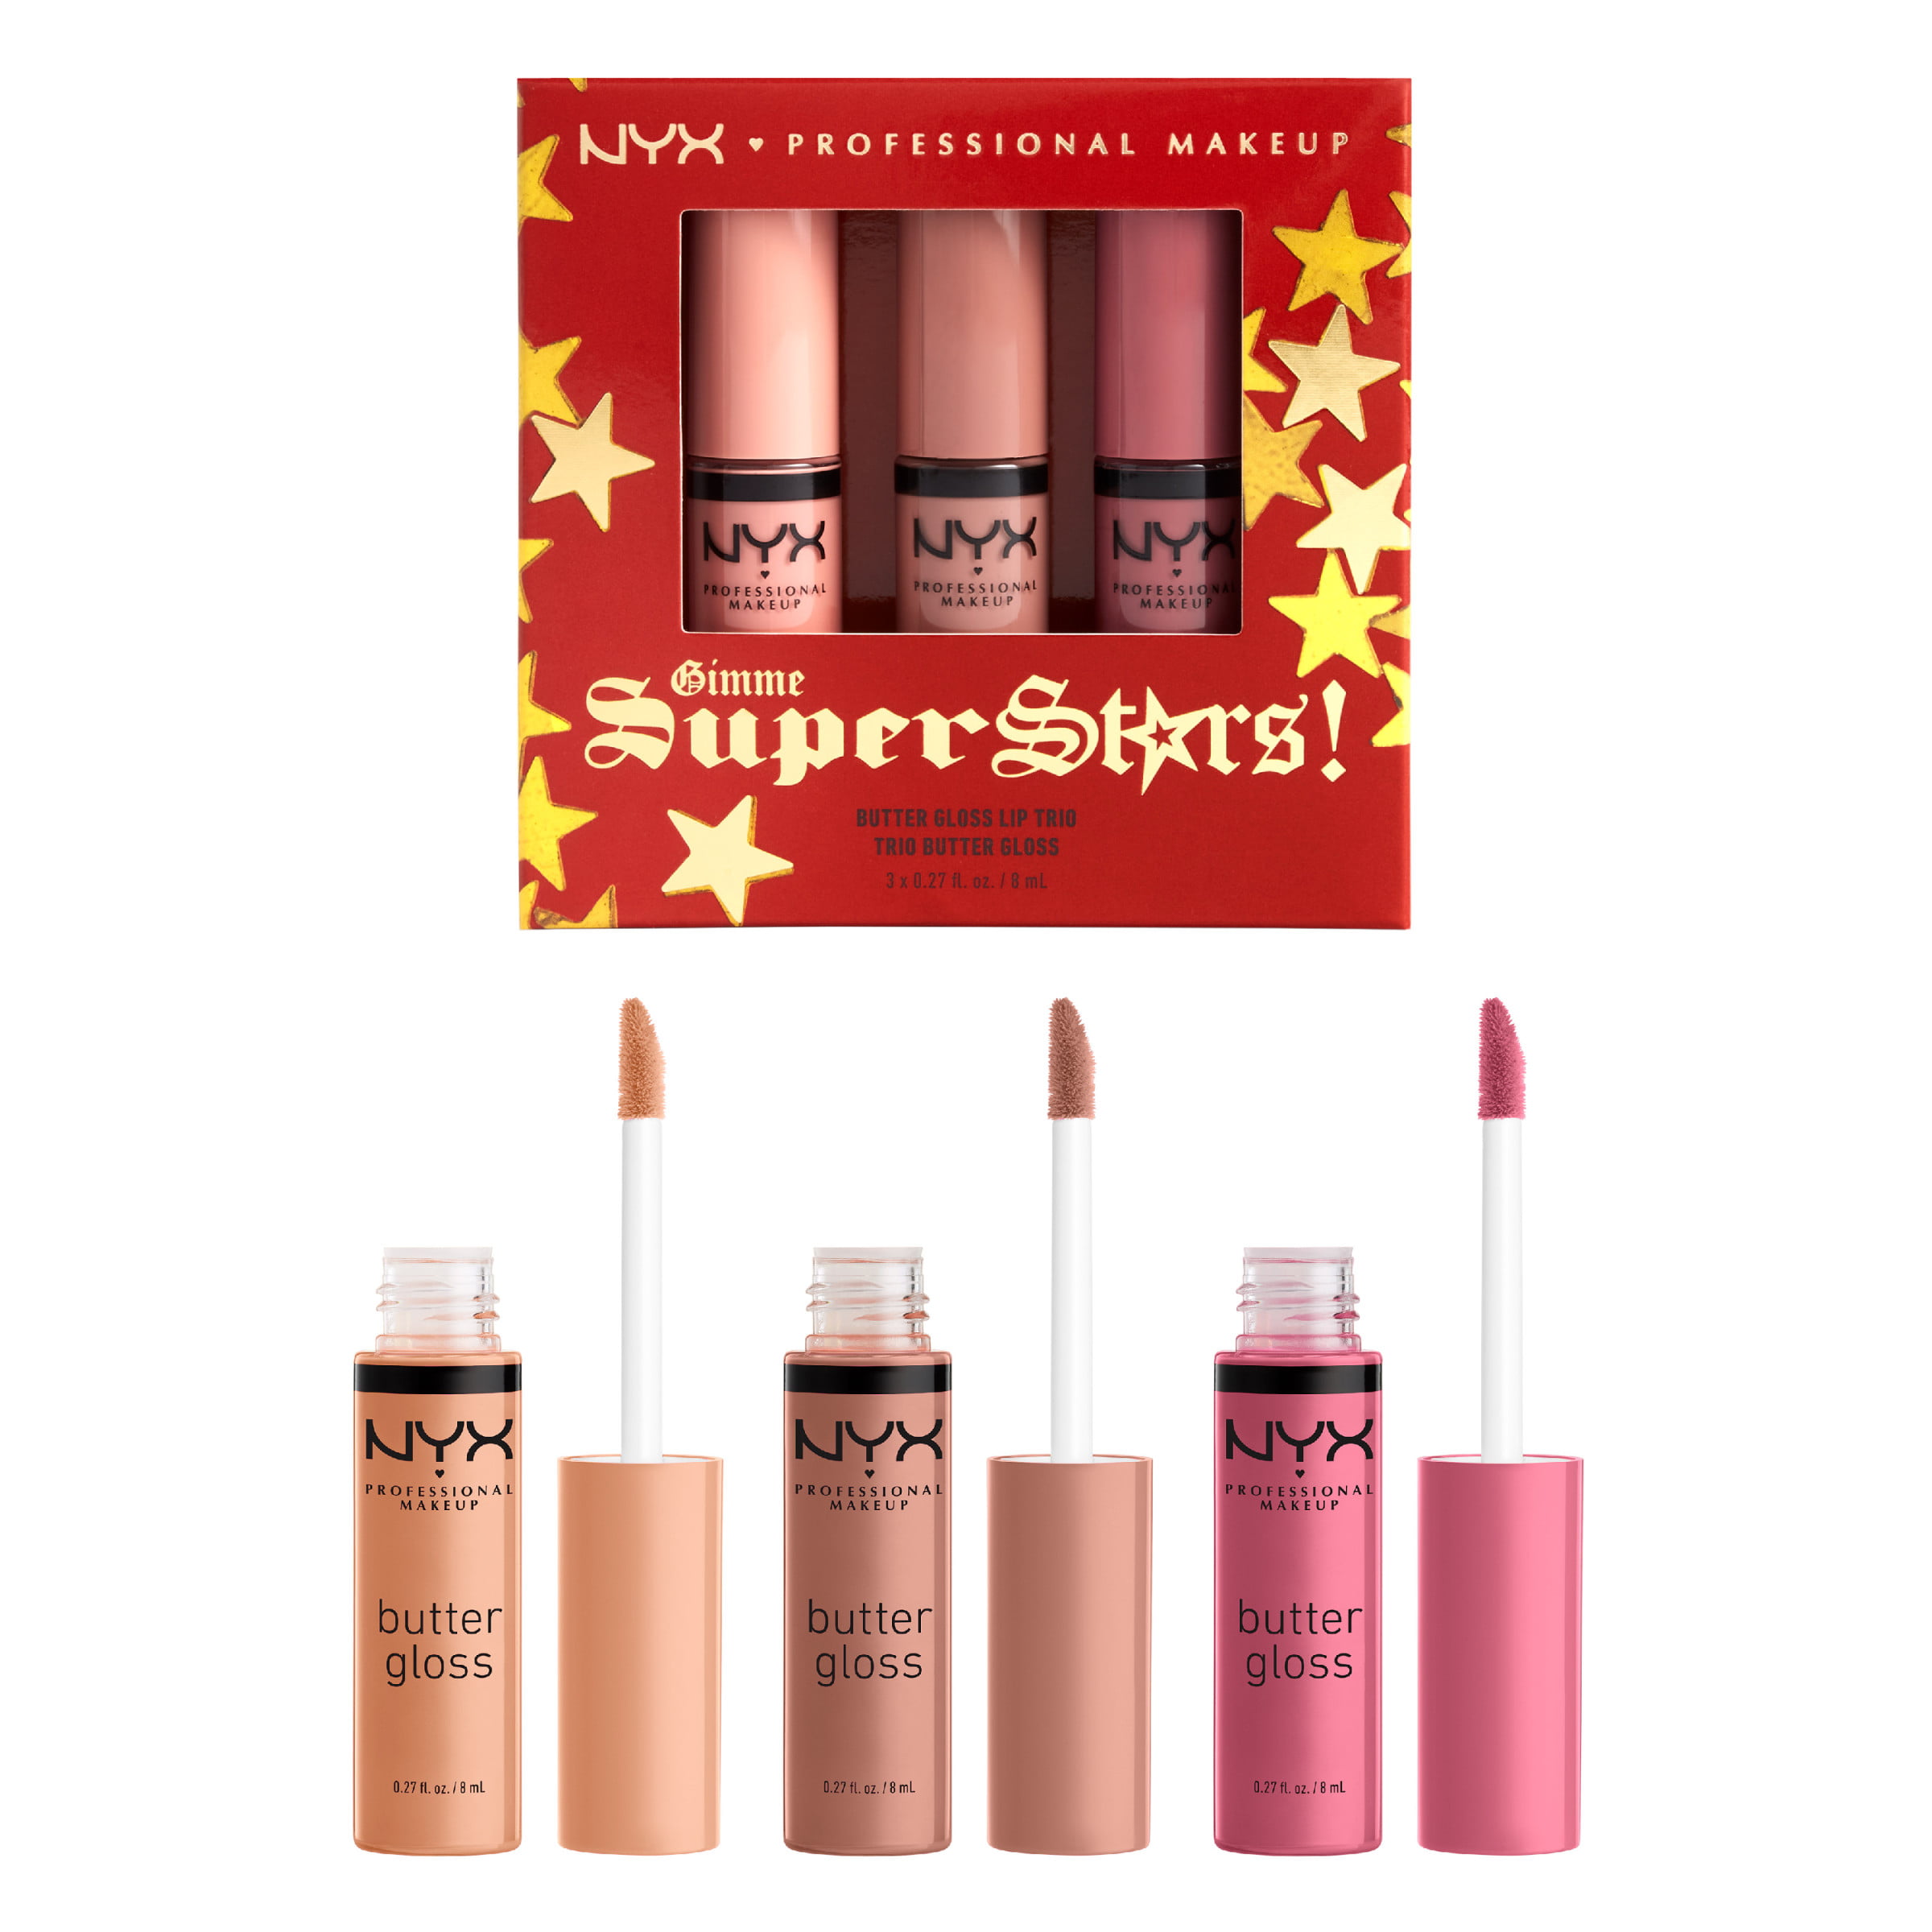 Makeup Gloss Light Conditioning Professional Gloss Trio, Nudes, Gift Set Sheer Lip Butter Non-Sticky NYX 3 Piece